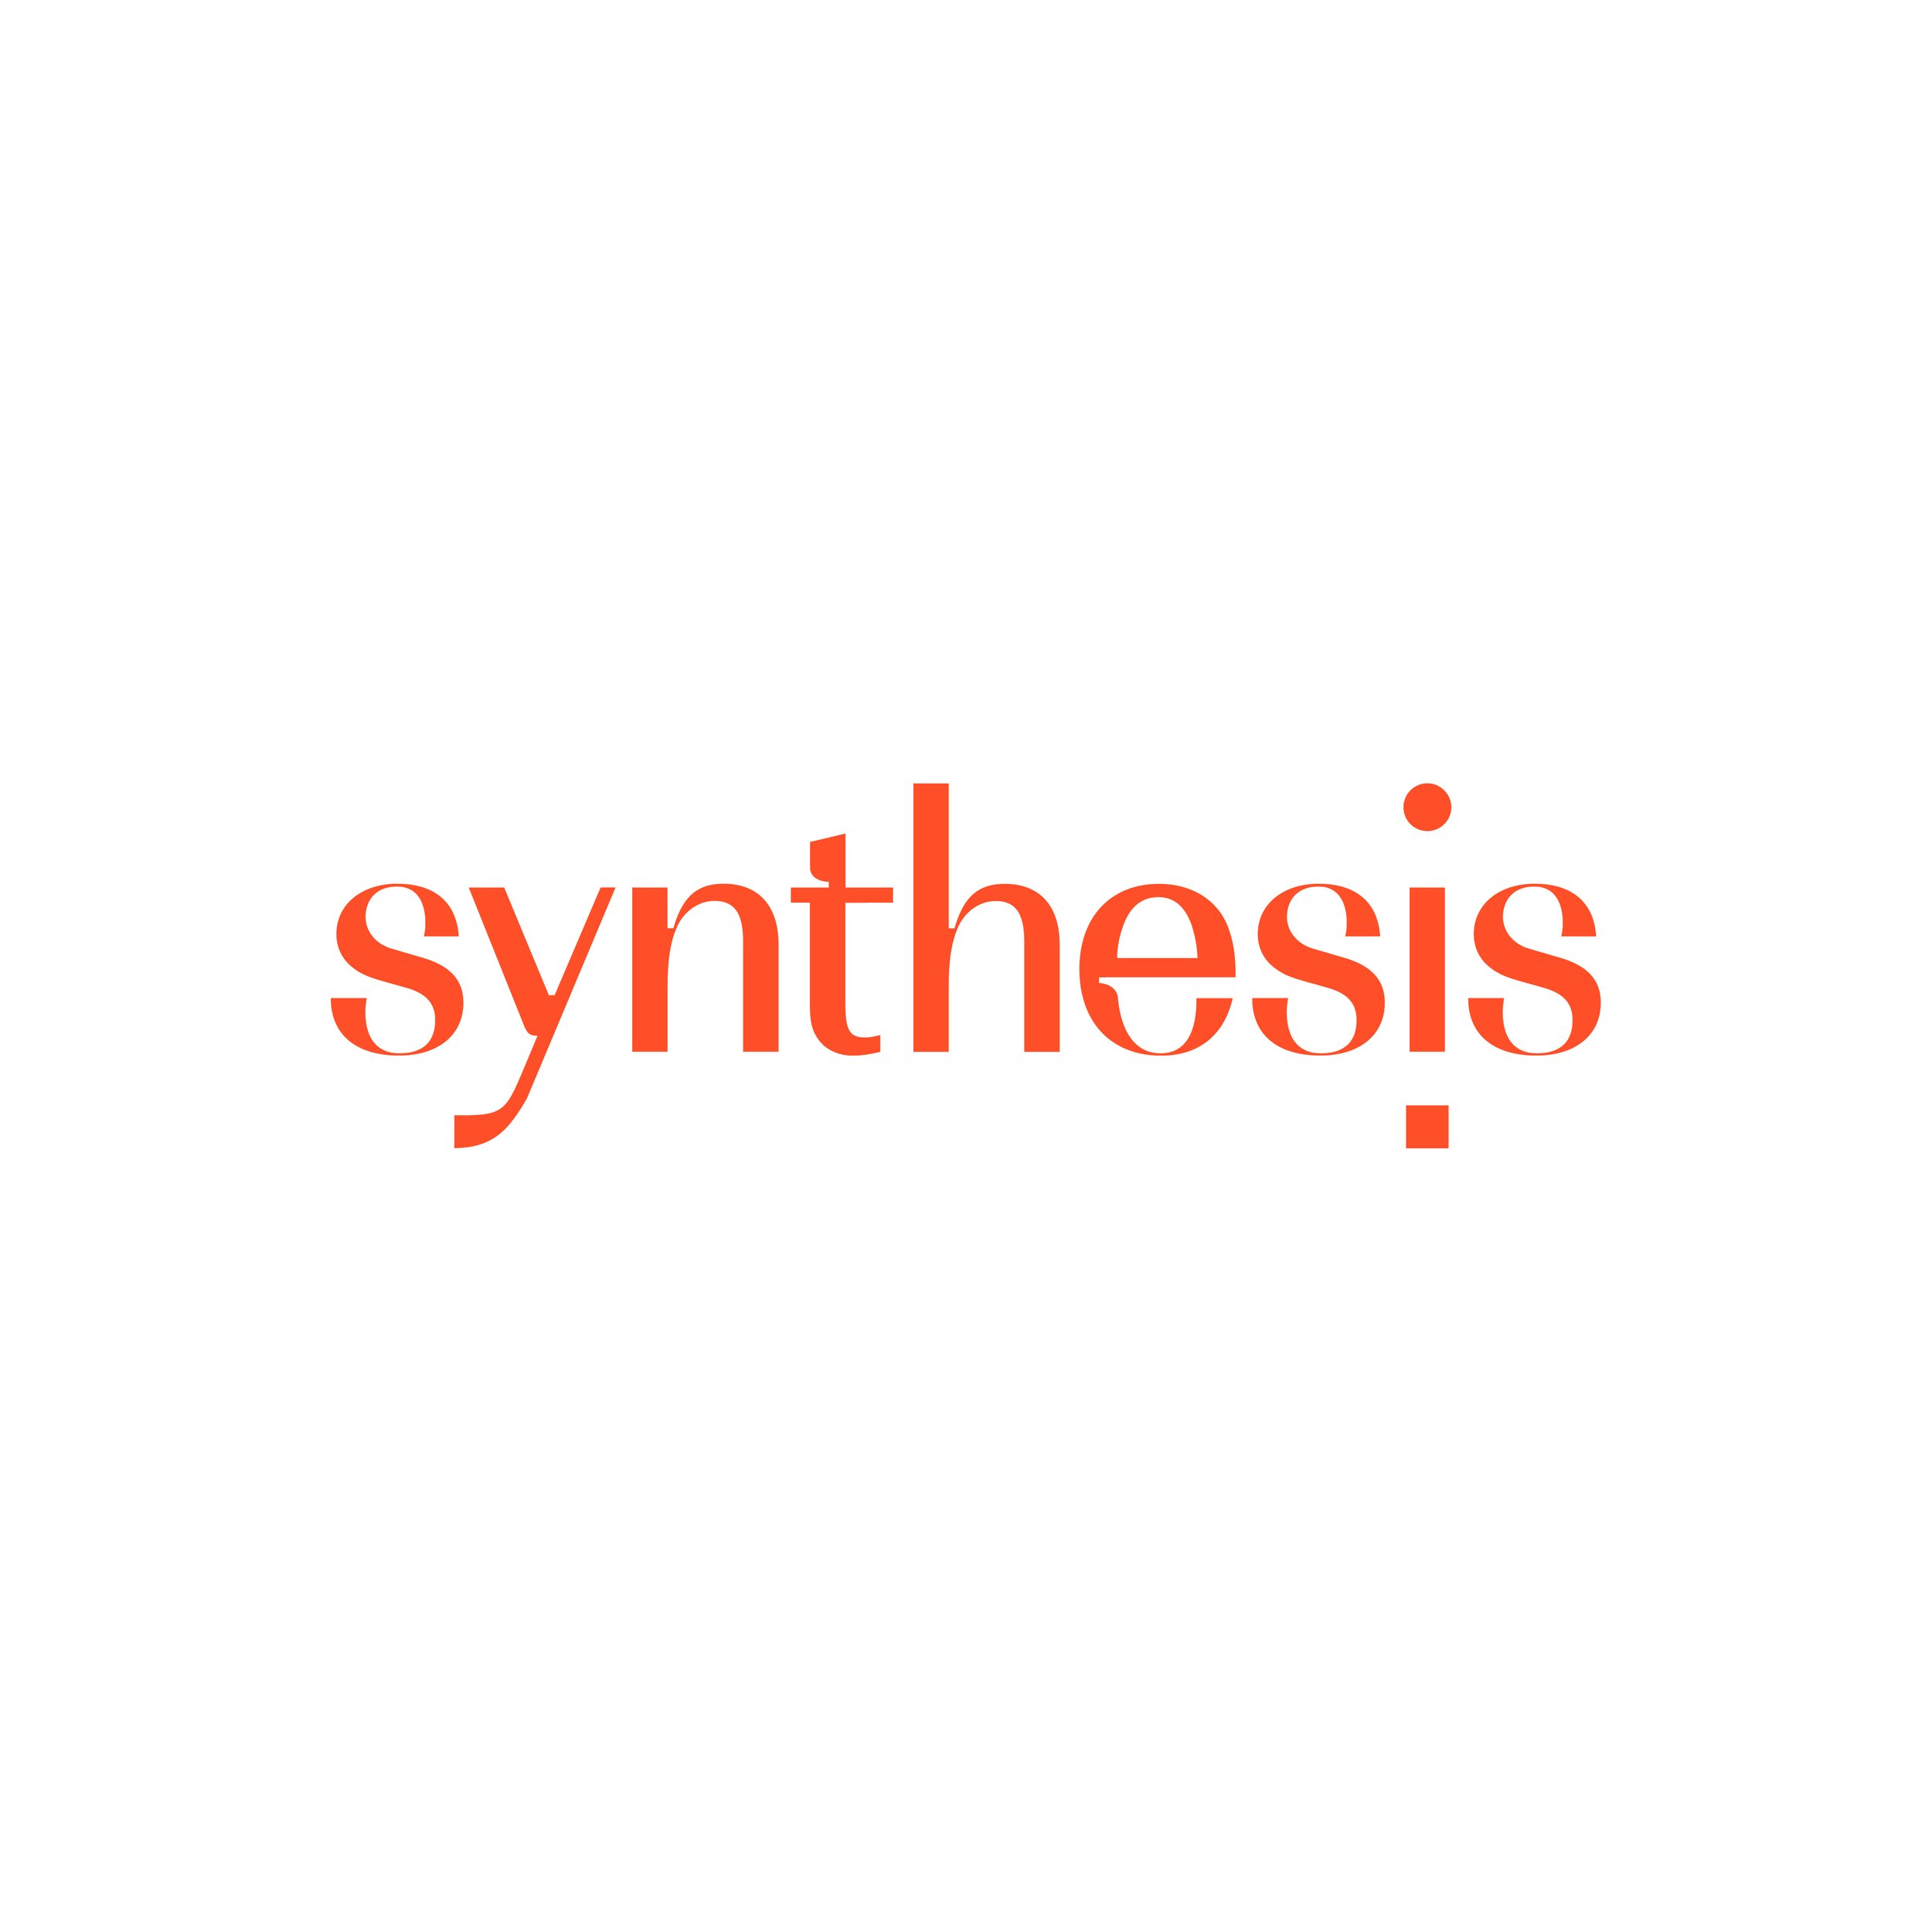 This is Synthesis- Certified B Corporation in Singapore